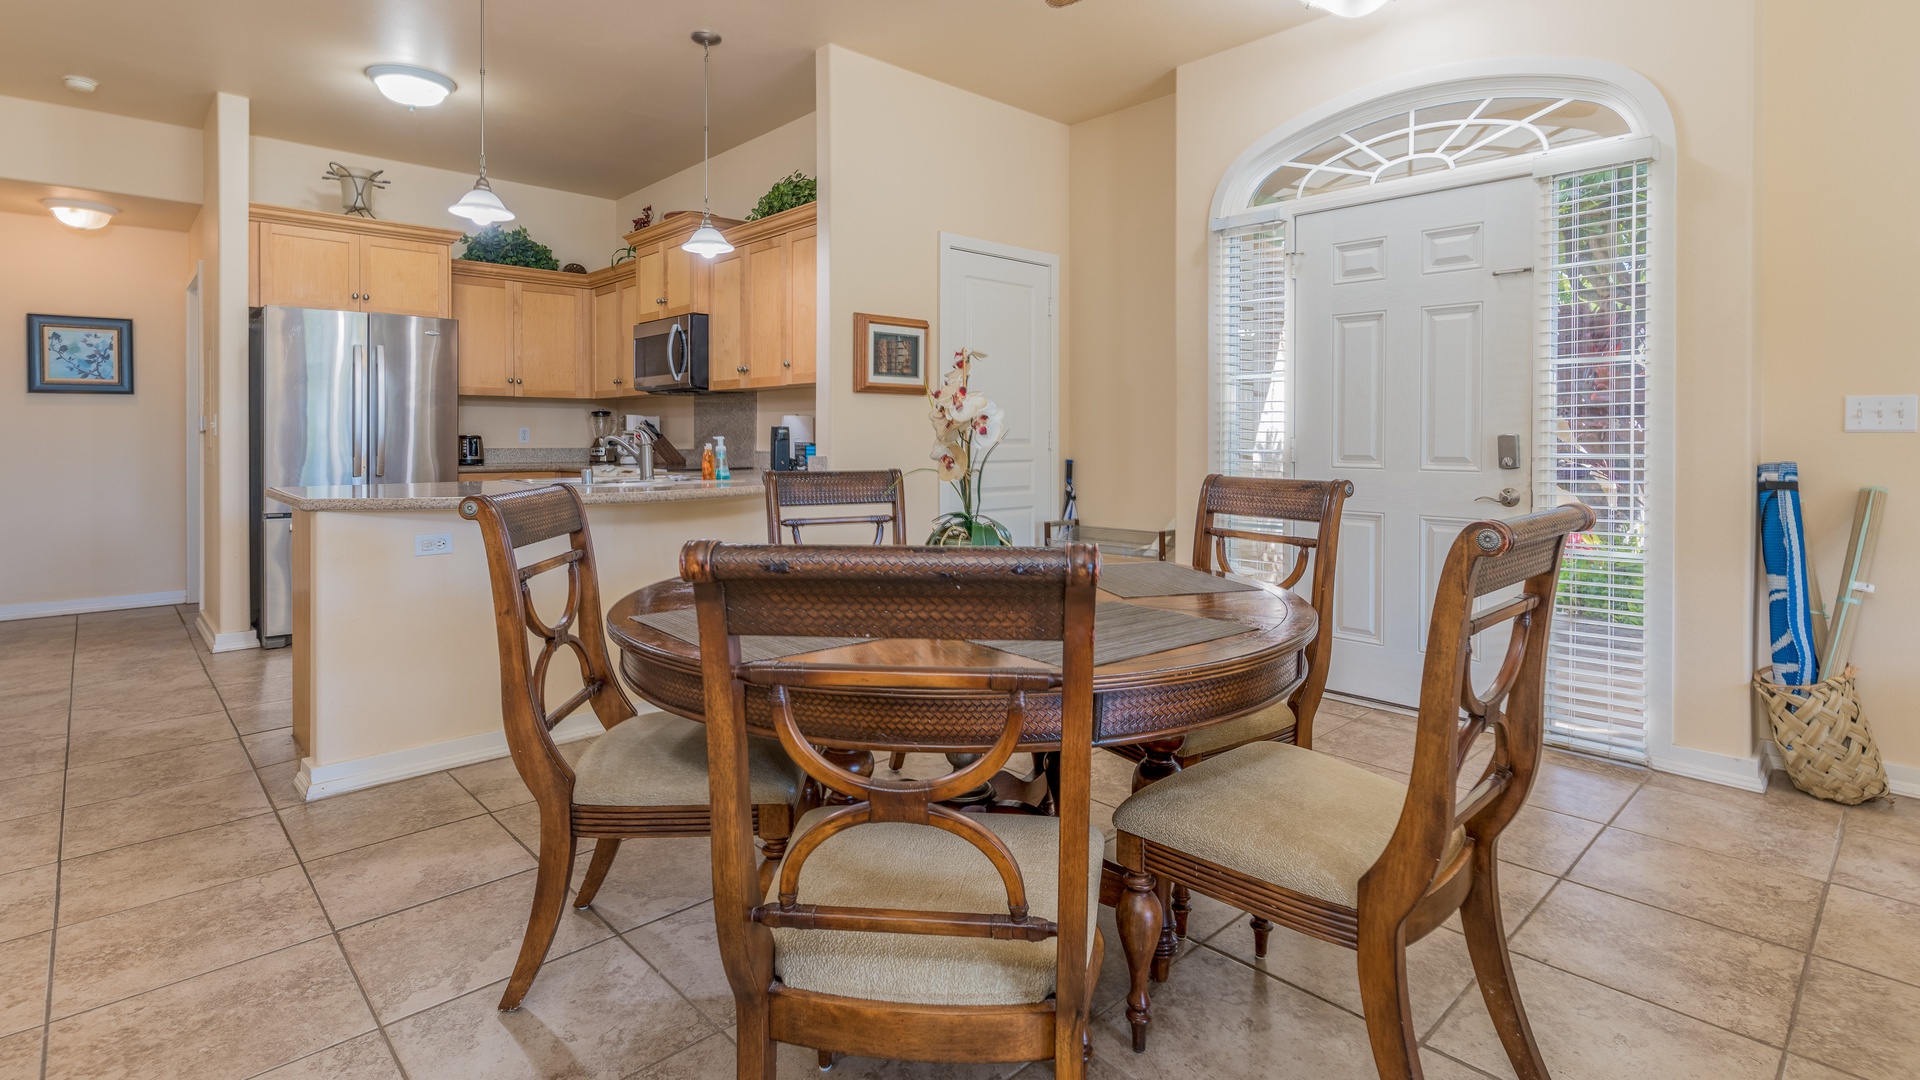 Kapolei Vacation Rentals, Kai Lani 8B - This cheerful dining allows for easy entertaining and card games.